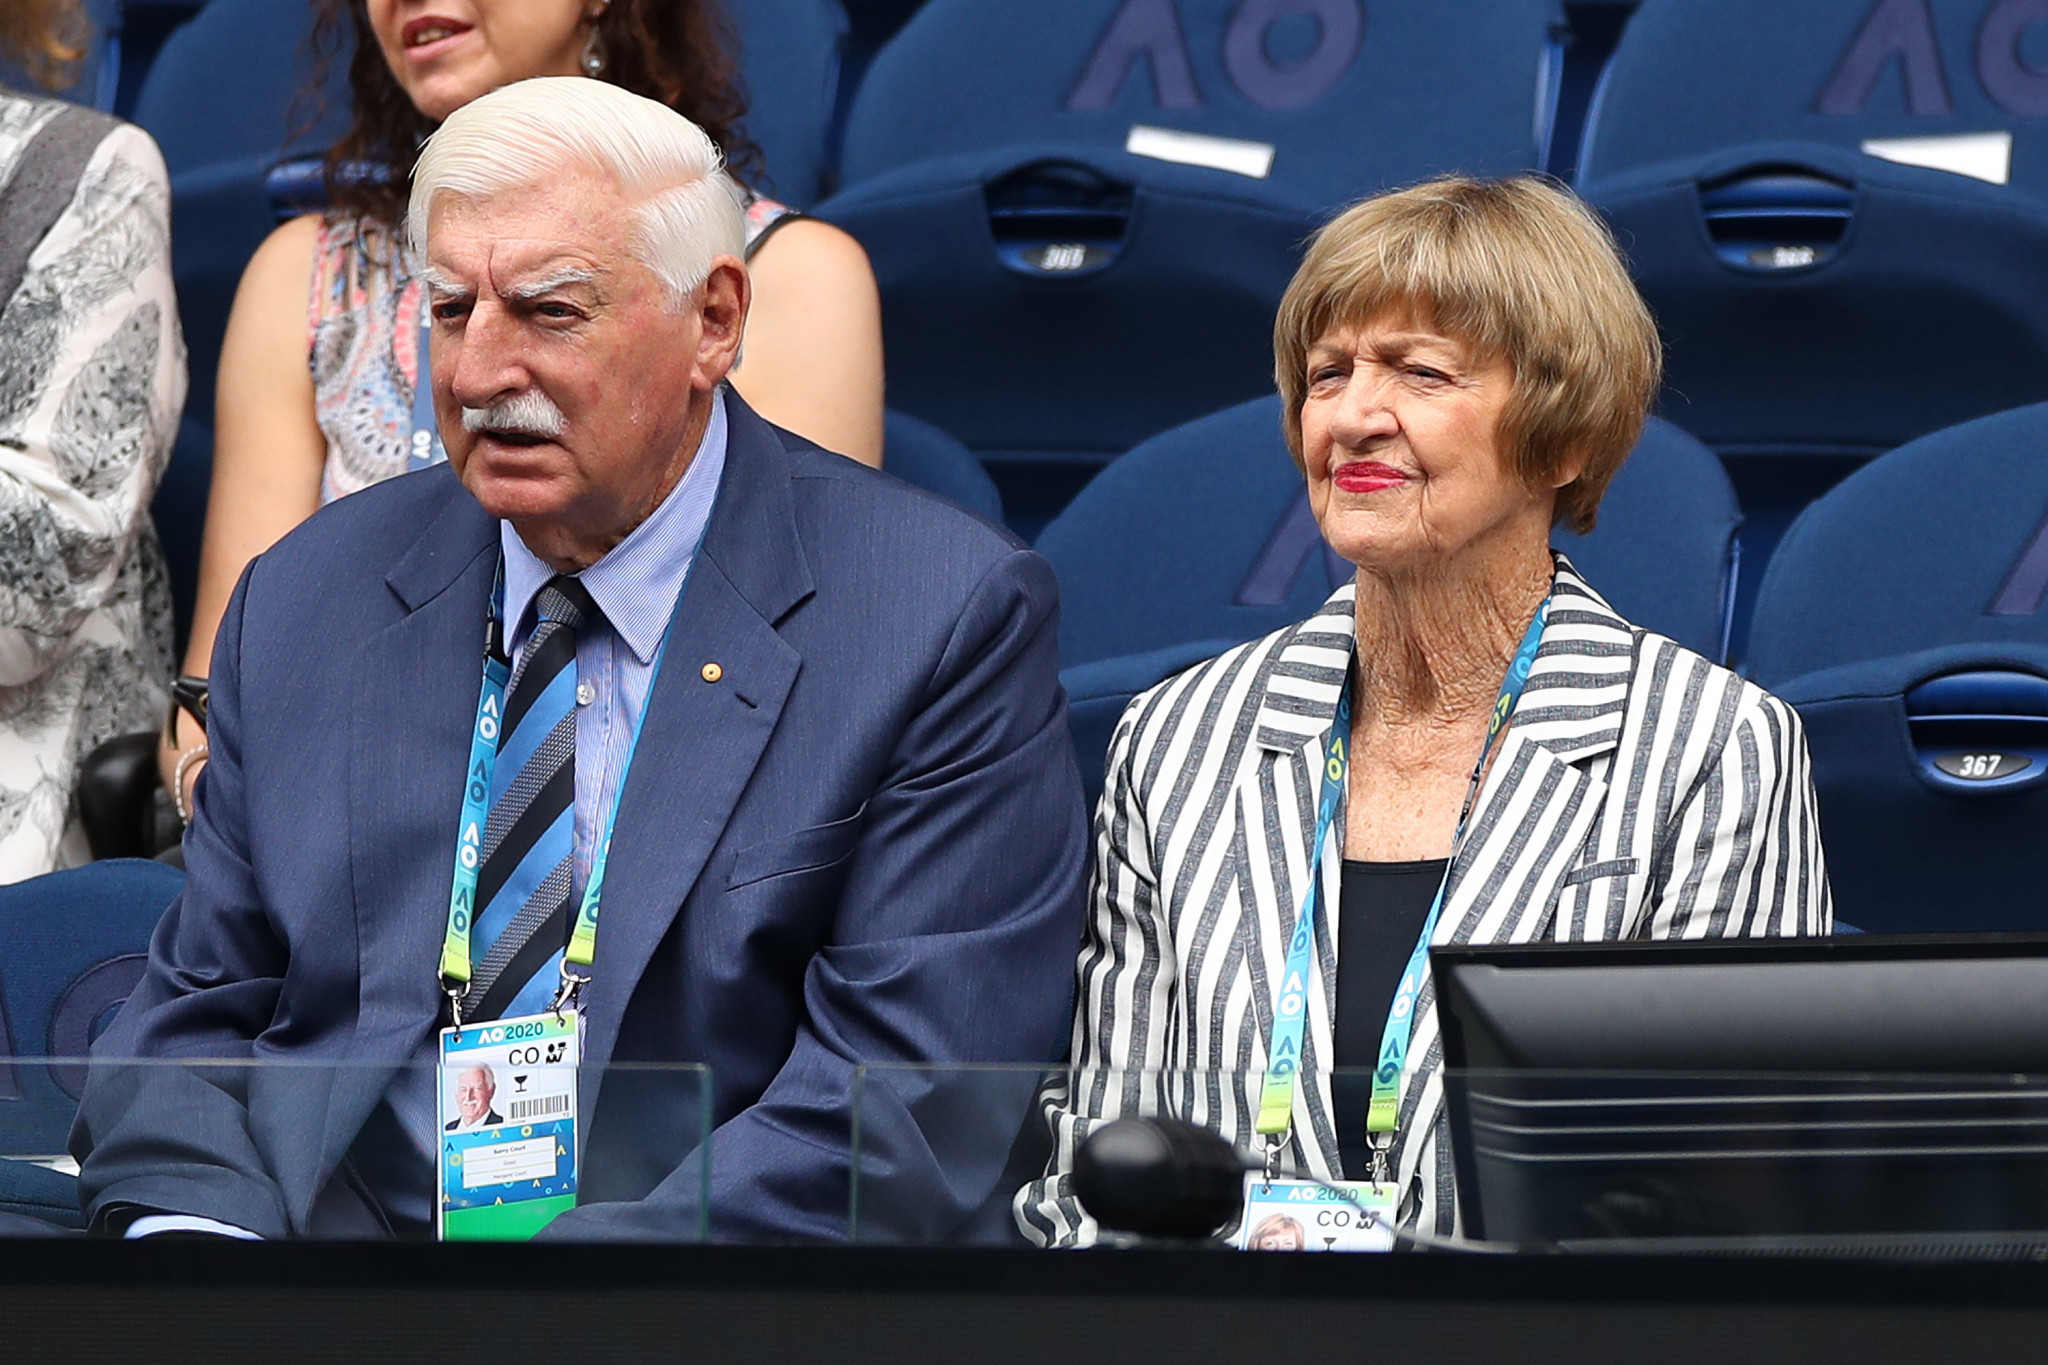 Margaret Court and her husband Barrymore watch this year's Australian Open today ©Getty Images